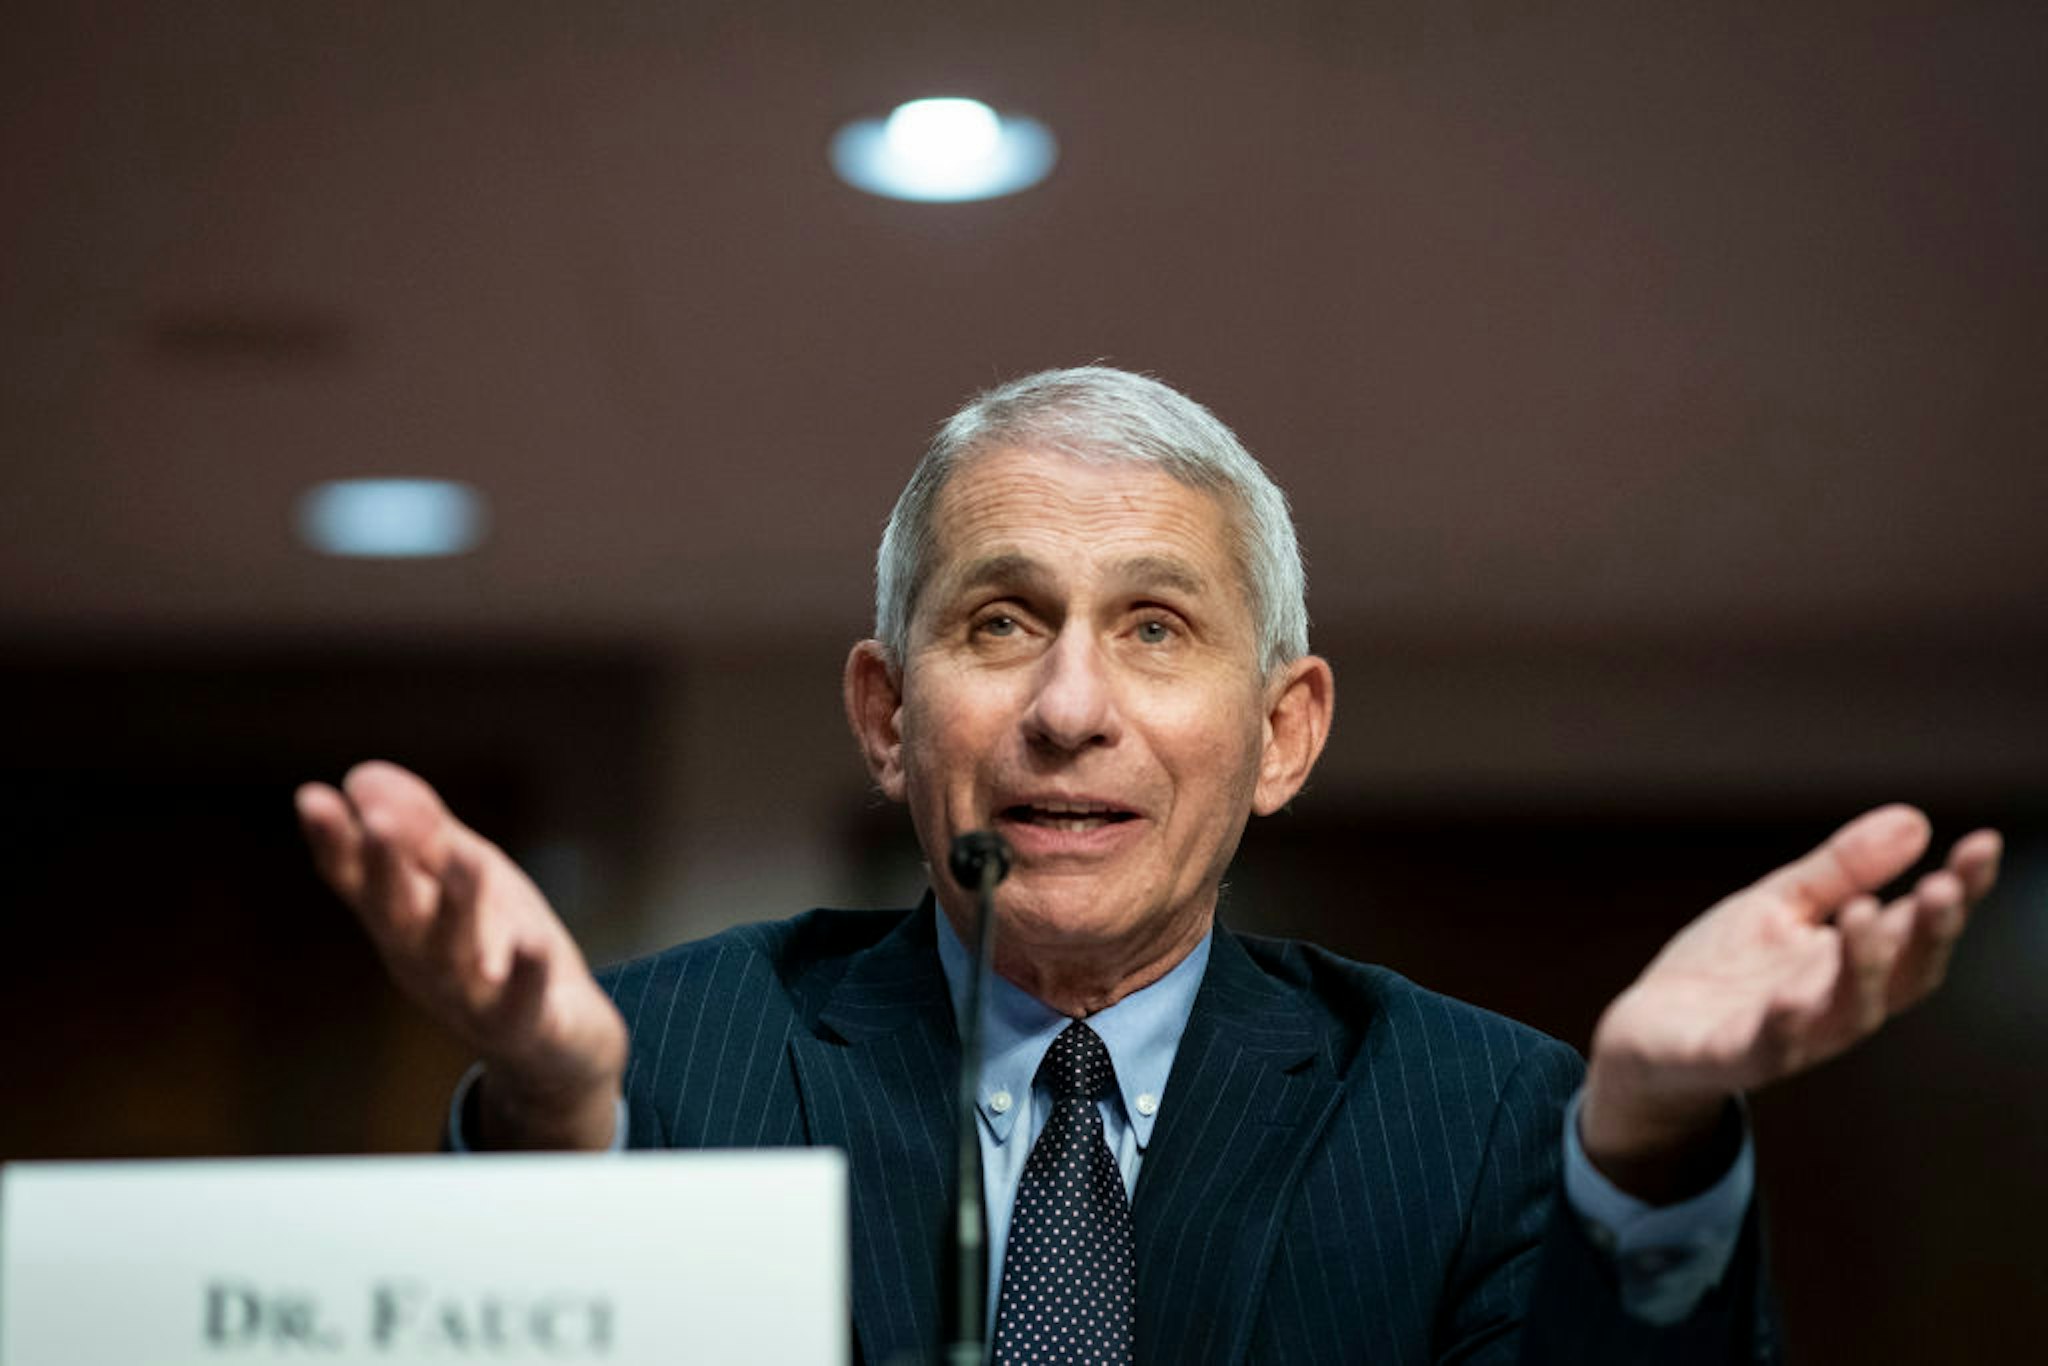 WASHINGTON, DC - JUNE 30: Dr. Anthony Fauci, director of the National Institute of Allergy and Infectious Diseases, speaks during a Senate Health, Education, Labor and Pensions Committee hearing on June 30, 2020 in Washington, DC. Top federal health officials discussed efforts for safely getting back to work and school during the coronavirus pandemic.